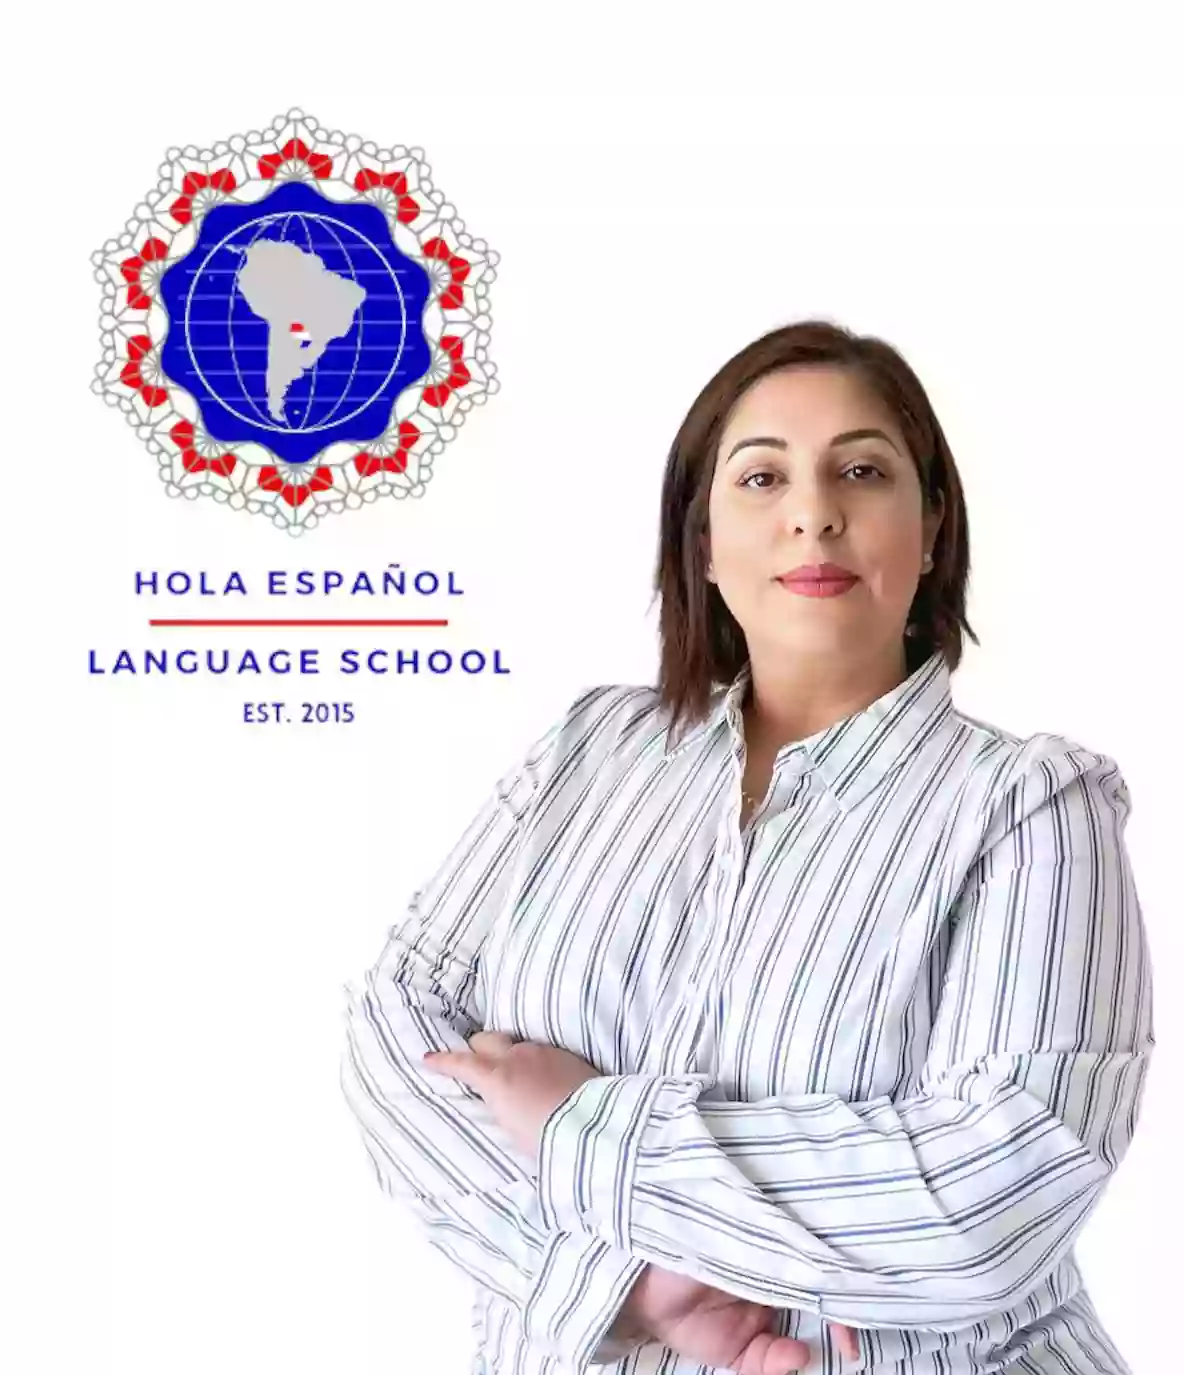 Hola Español Language School - Spanish lessons & tutoring in Southern Connecticut